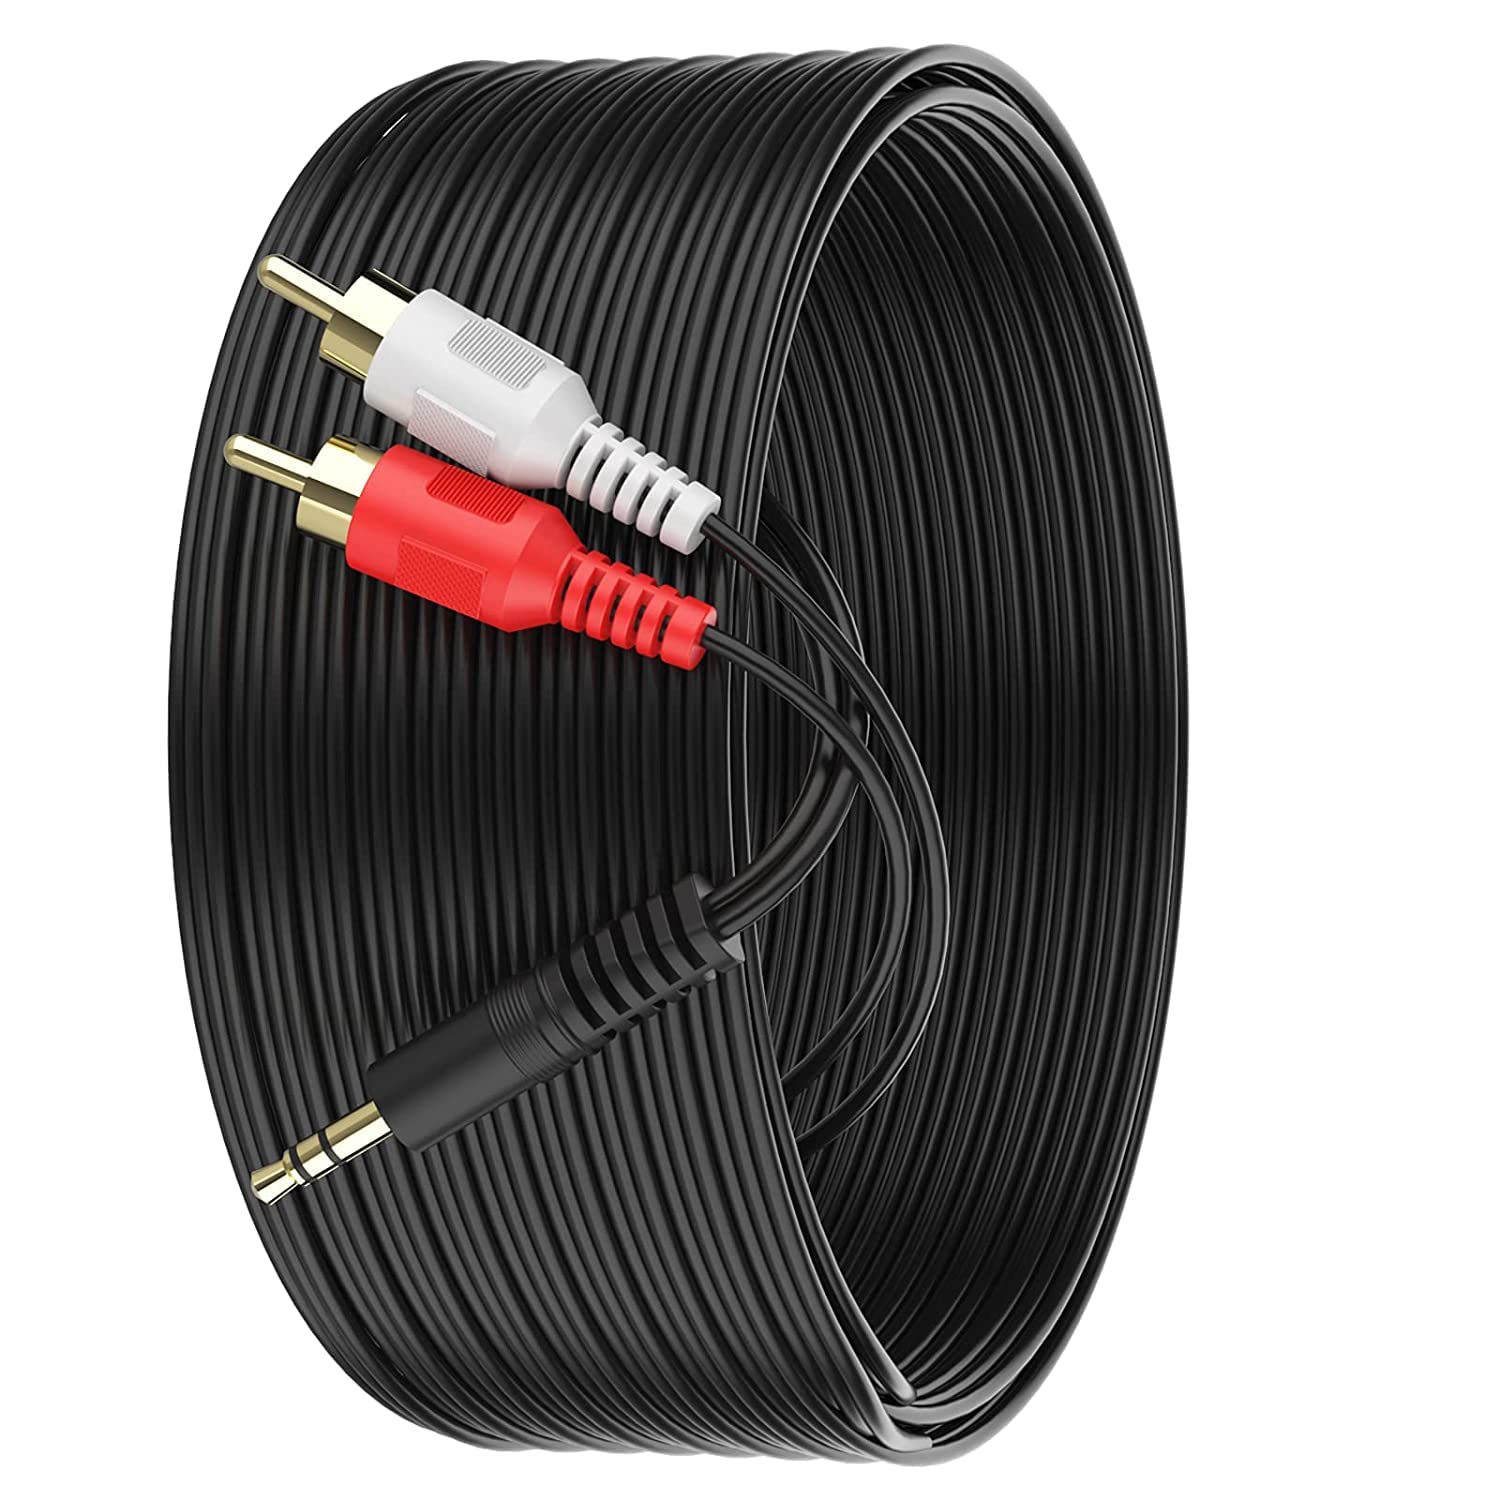 Buy Kebilshop 3.5mm Female Stereo Jack to 2 RCA Male Plugs Cable